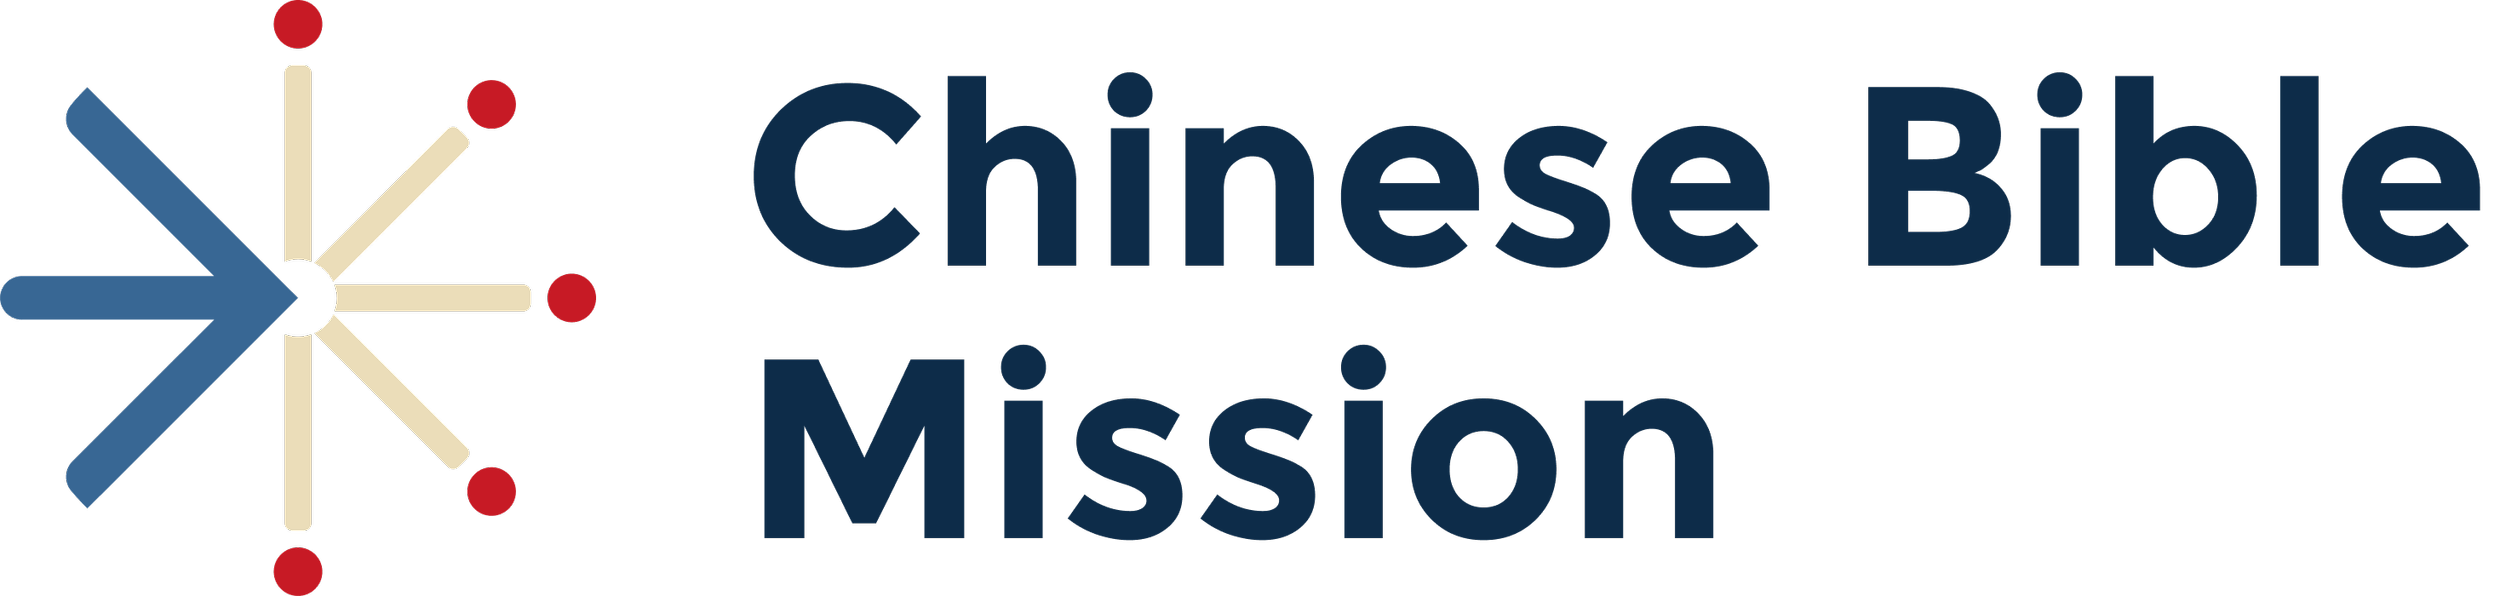 Chinese Bible Mission